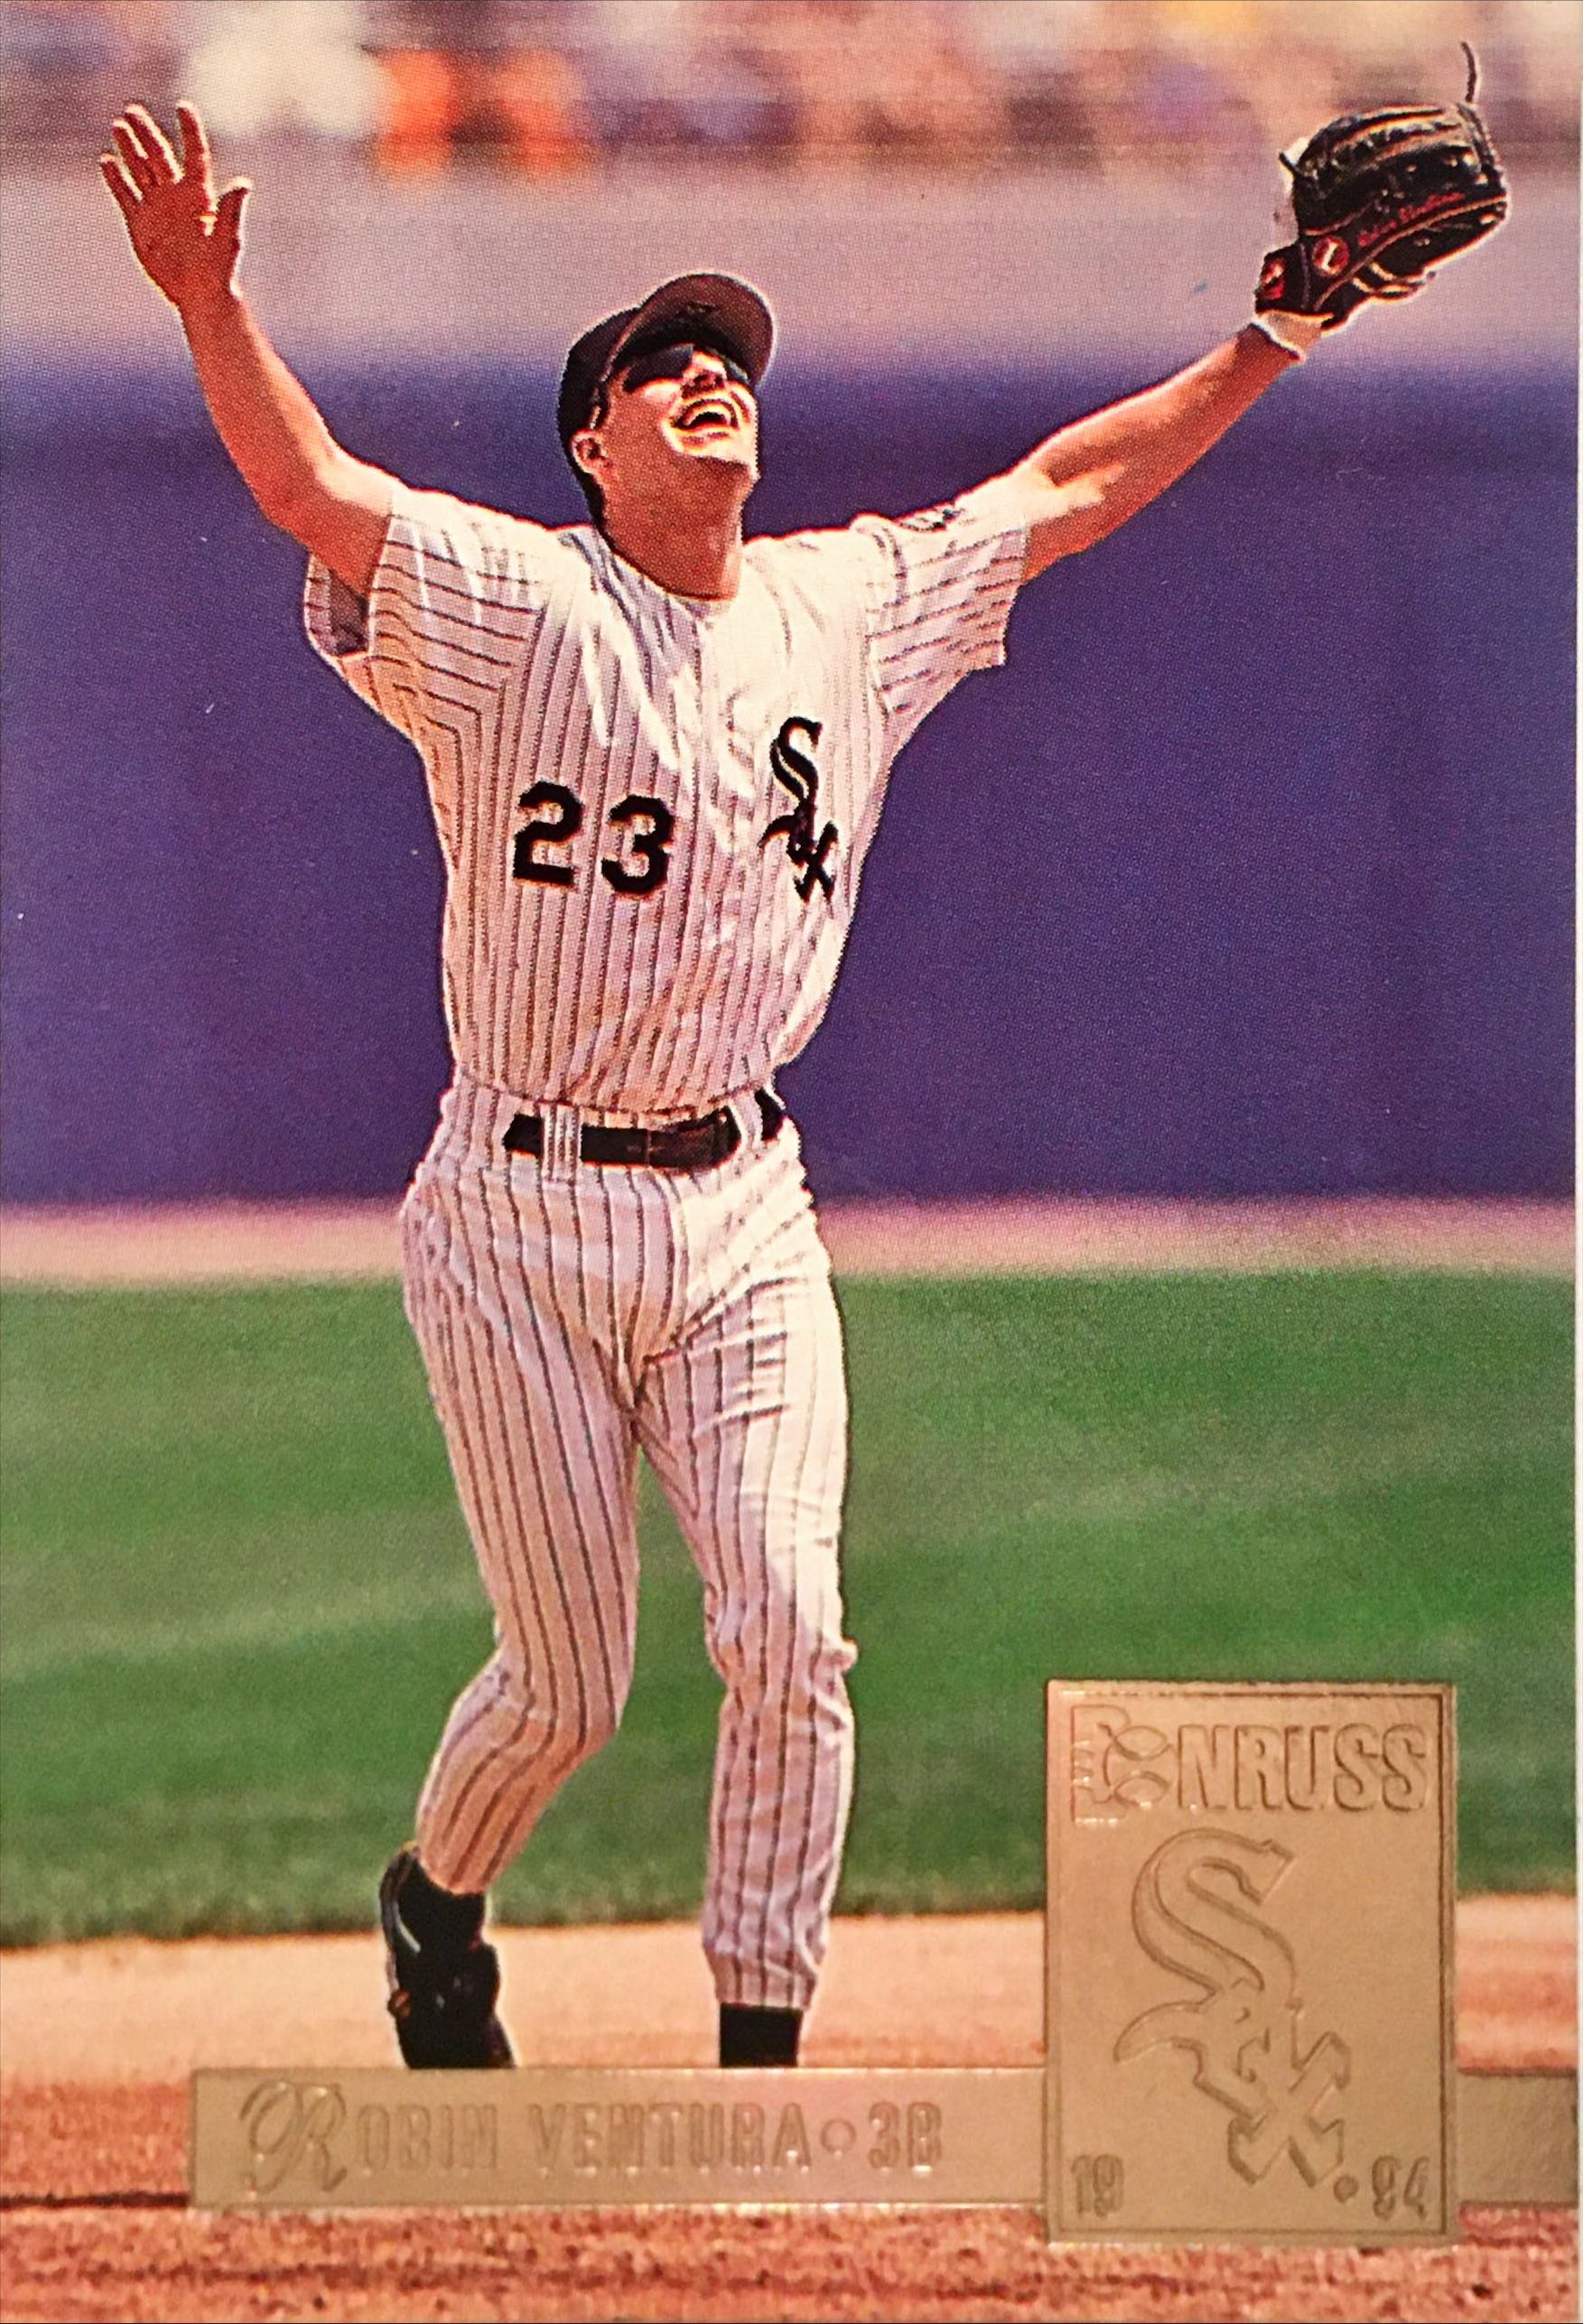 1994 Donruss Special Edition 23 front image